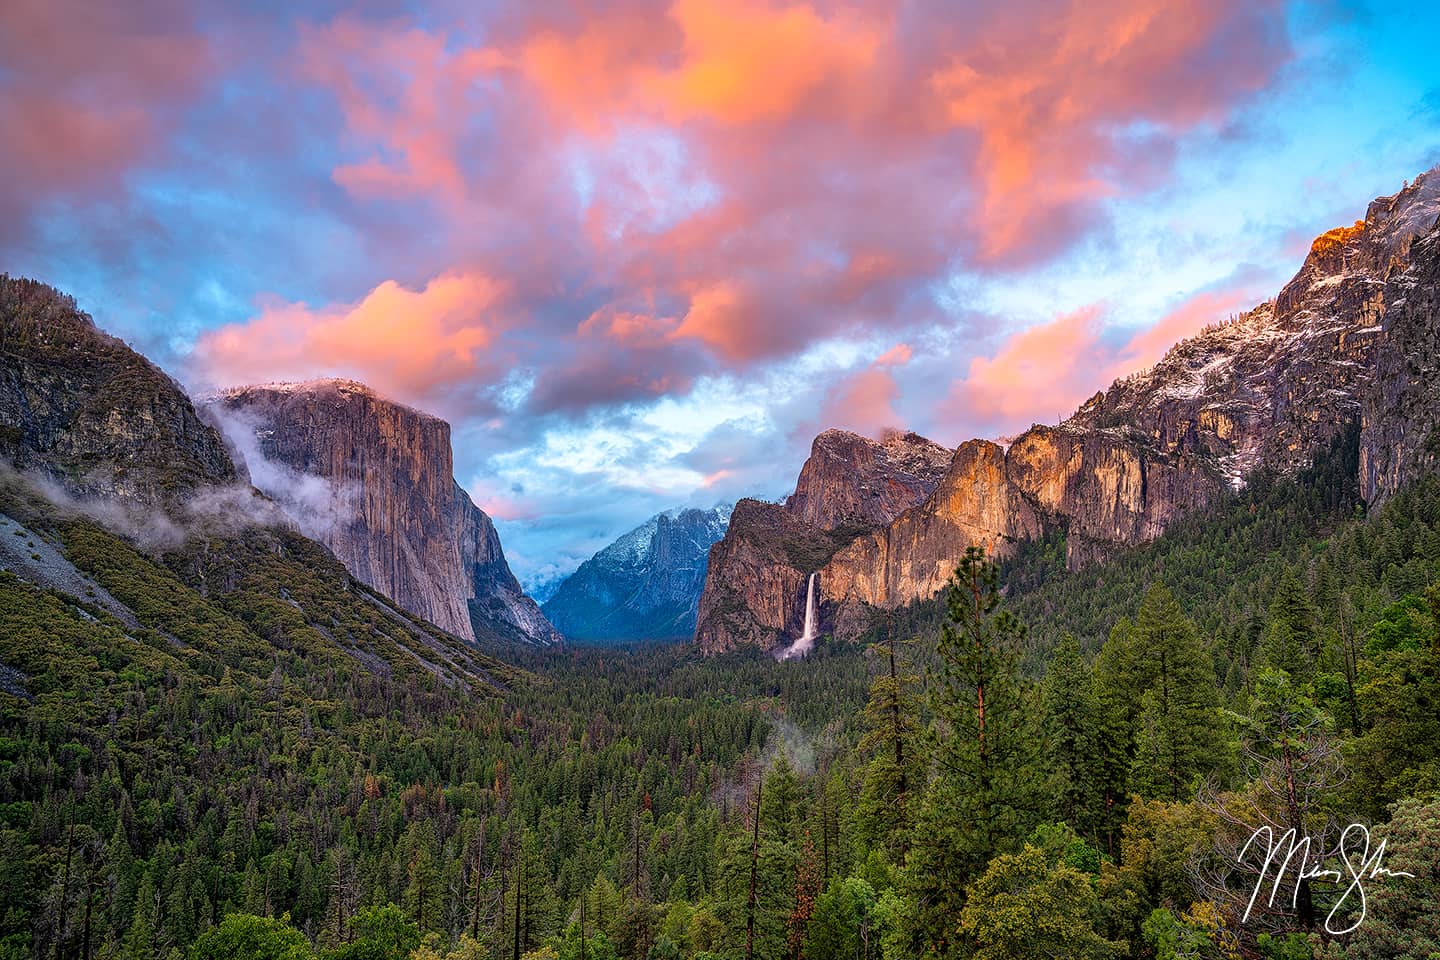 Tunnel View Sunset - Tunnel View, Yosemite National Park, California